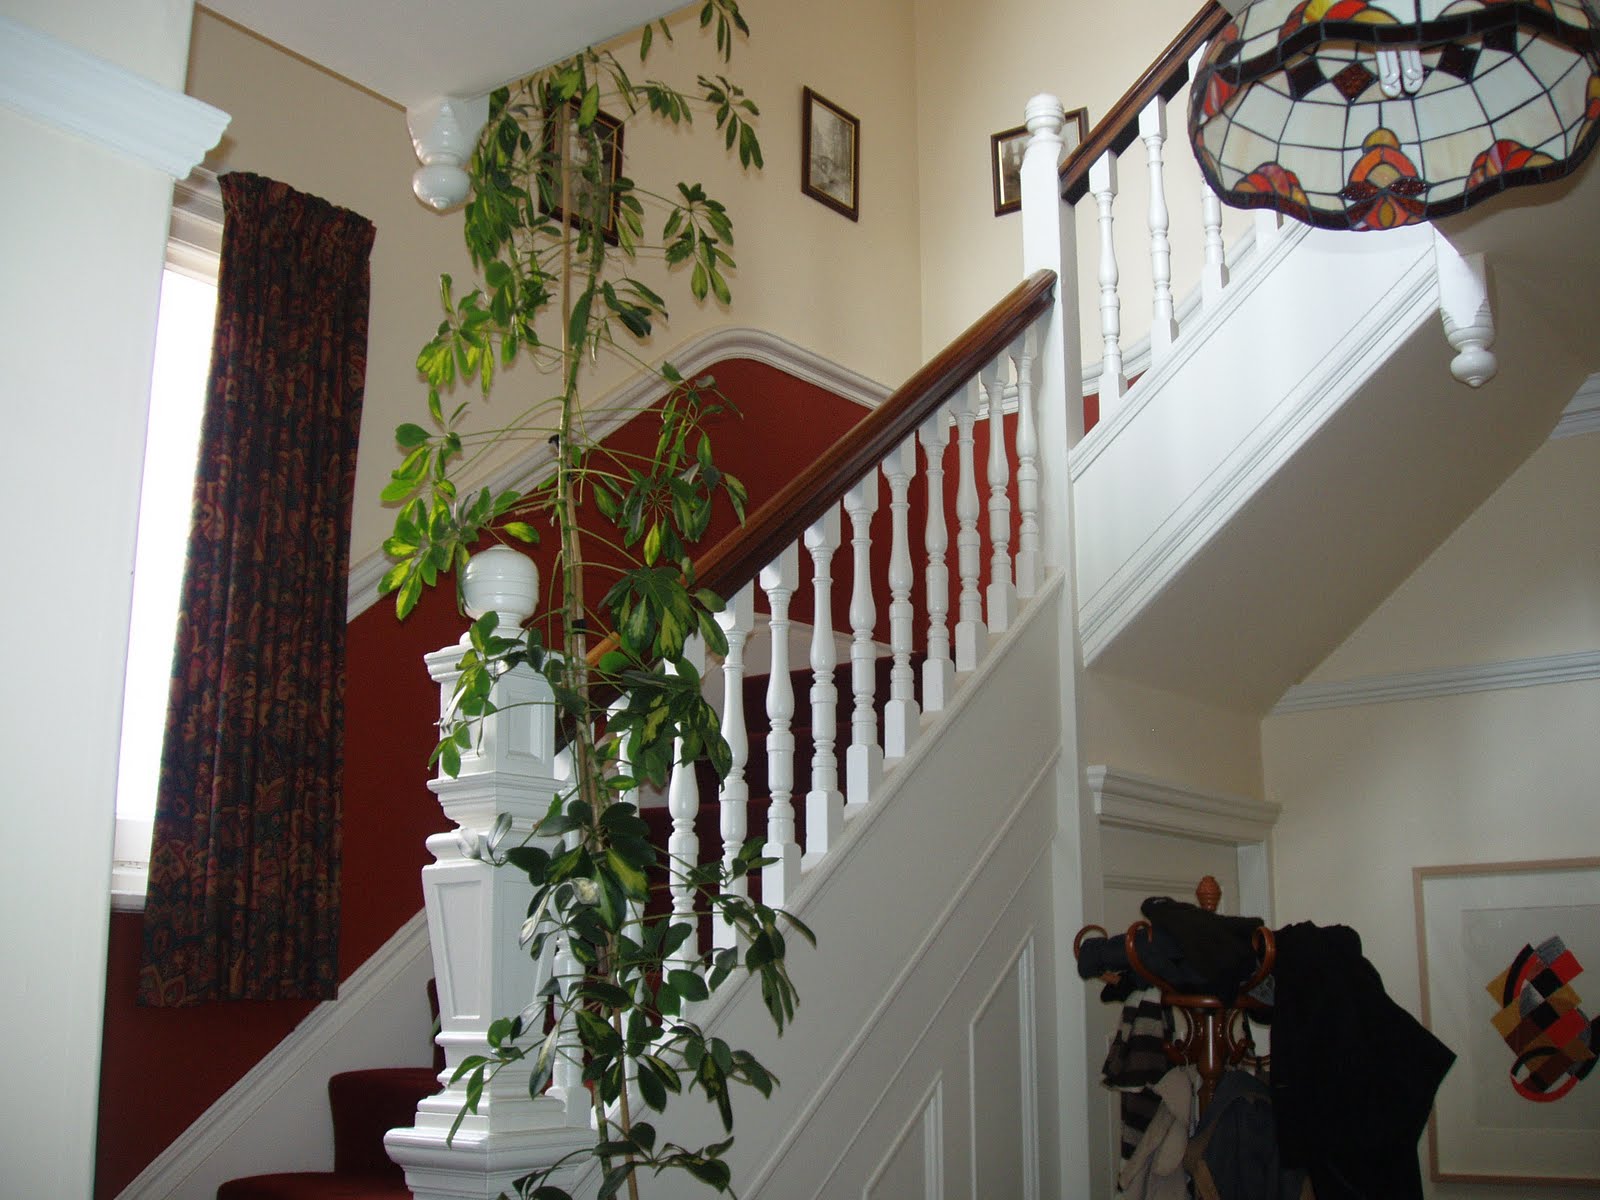 Painted banister inside a Leicester house